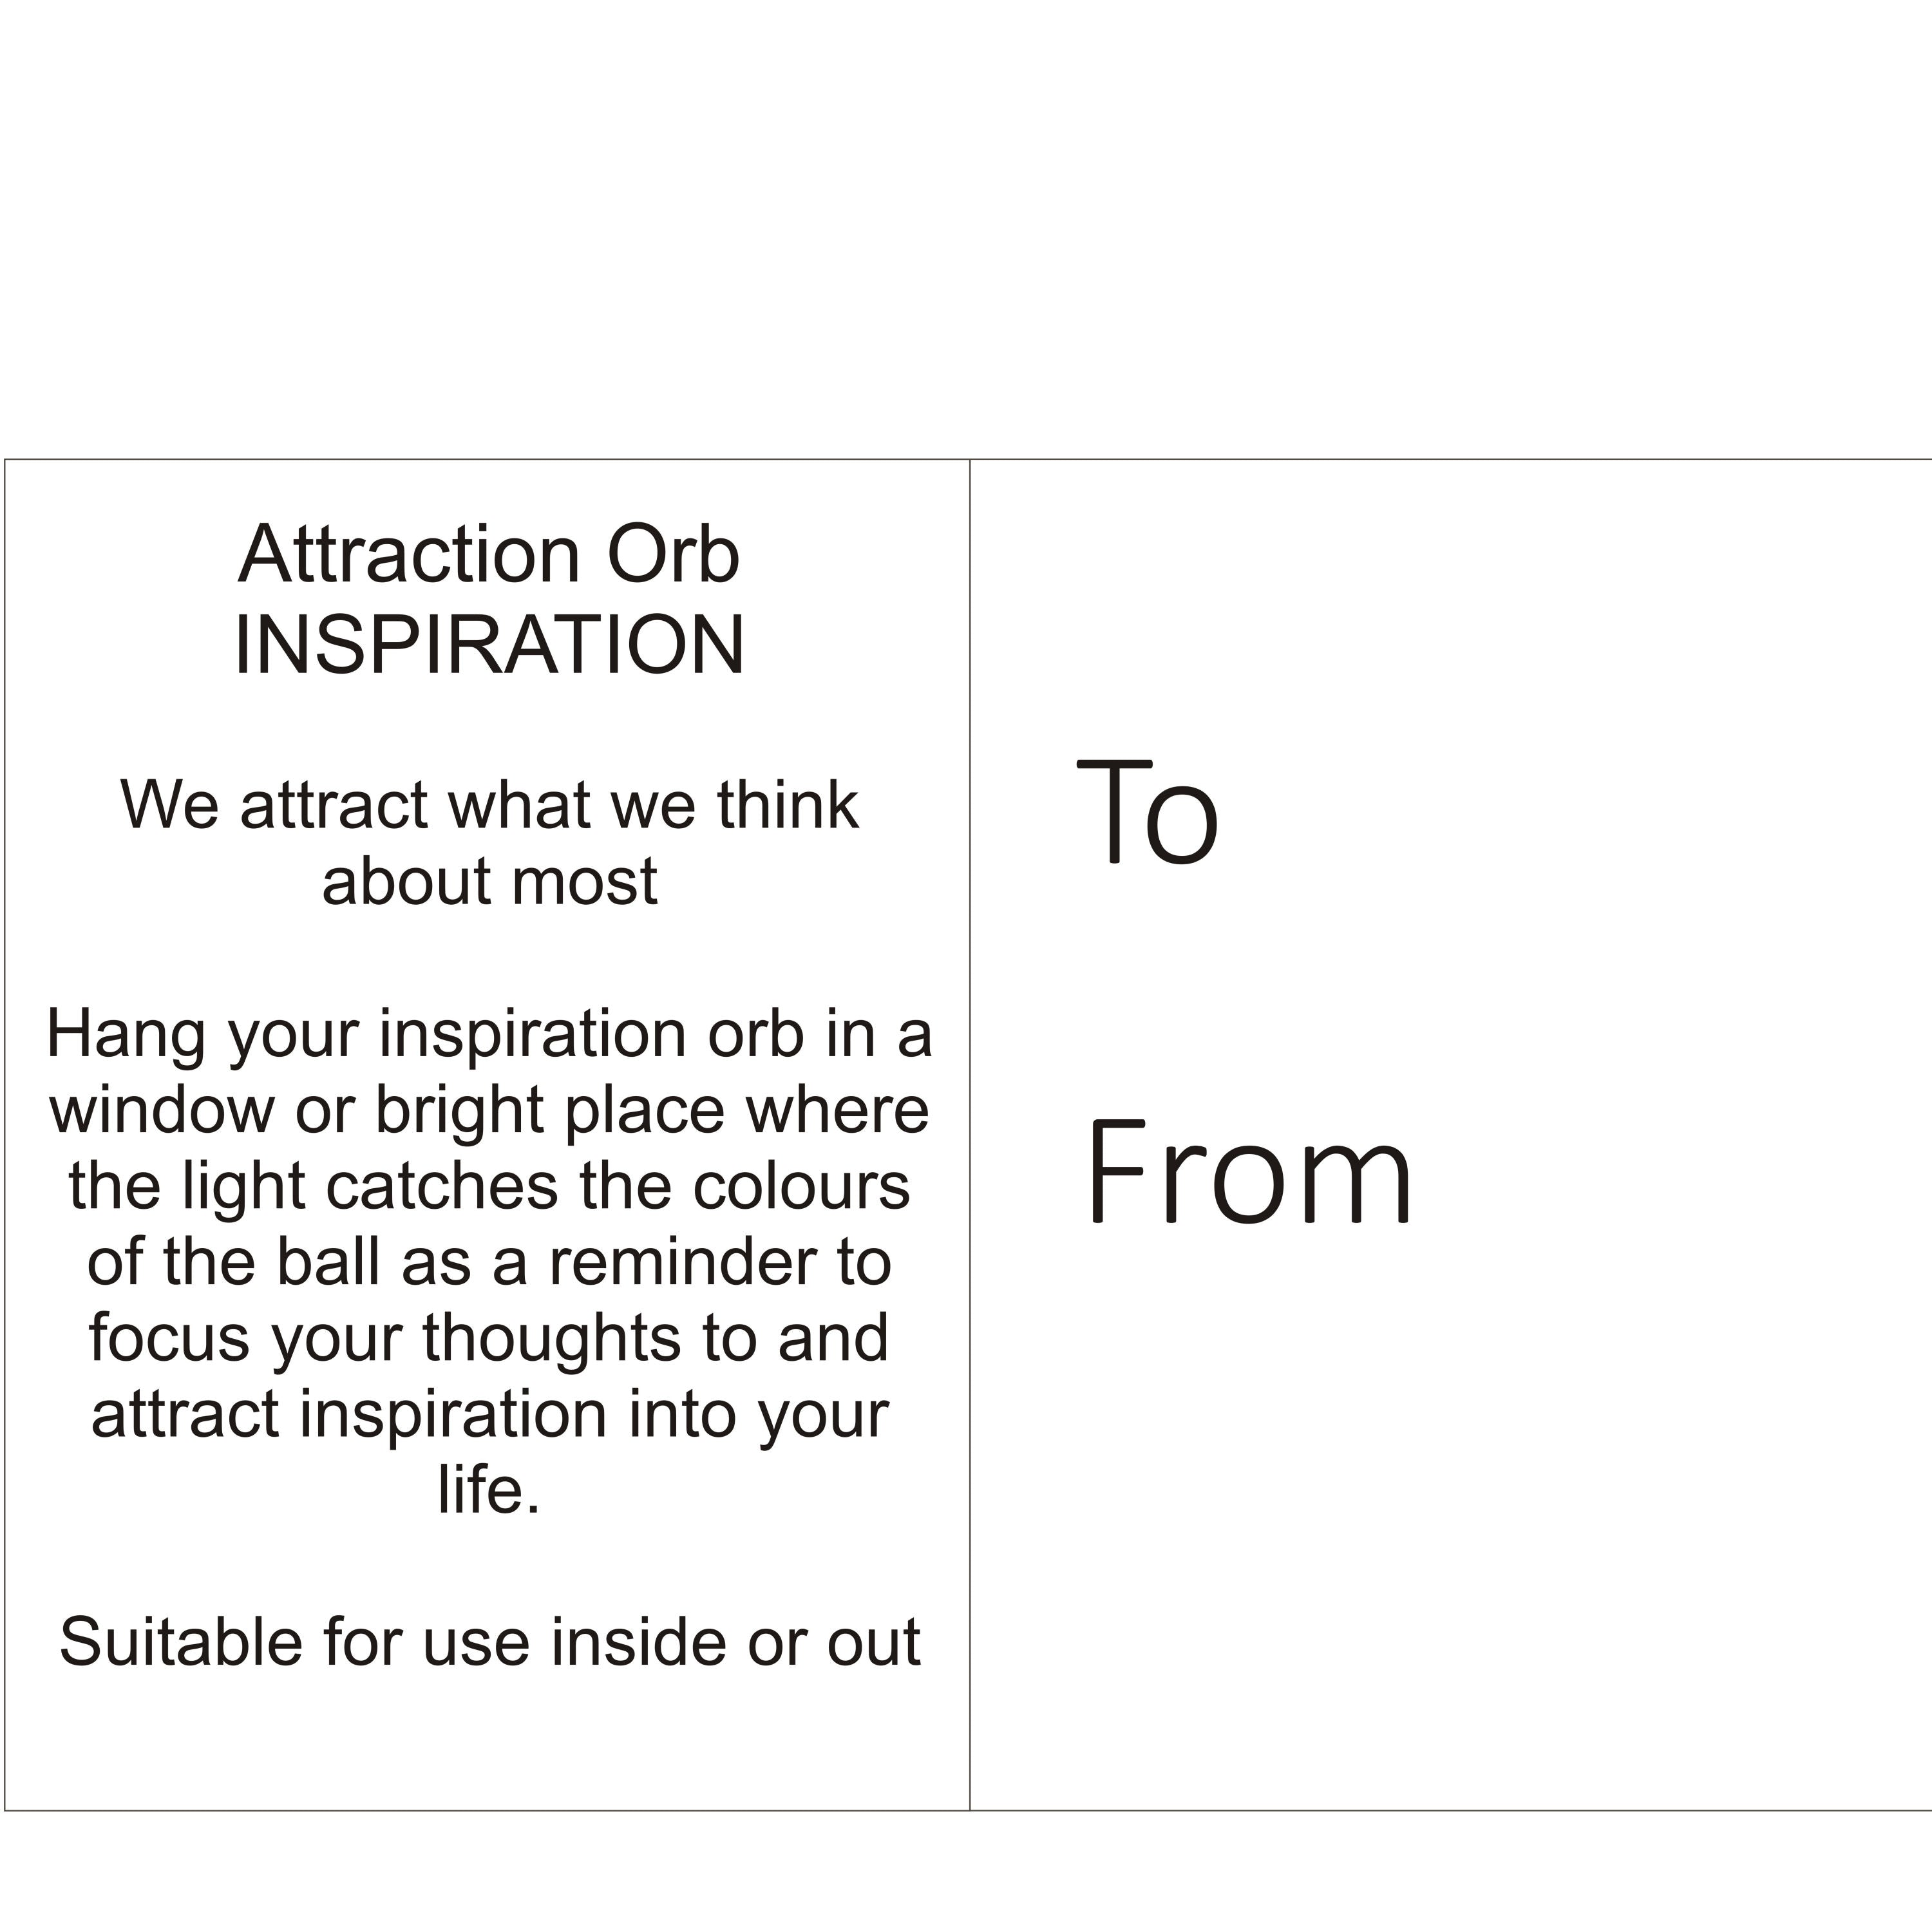 Attraction Orb - Inspiration